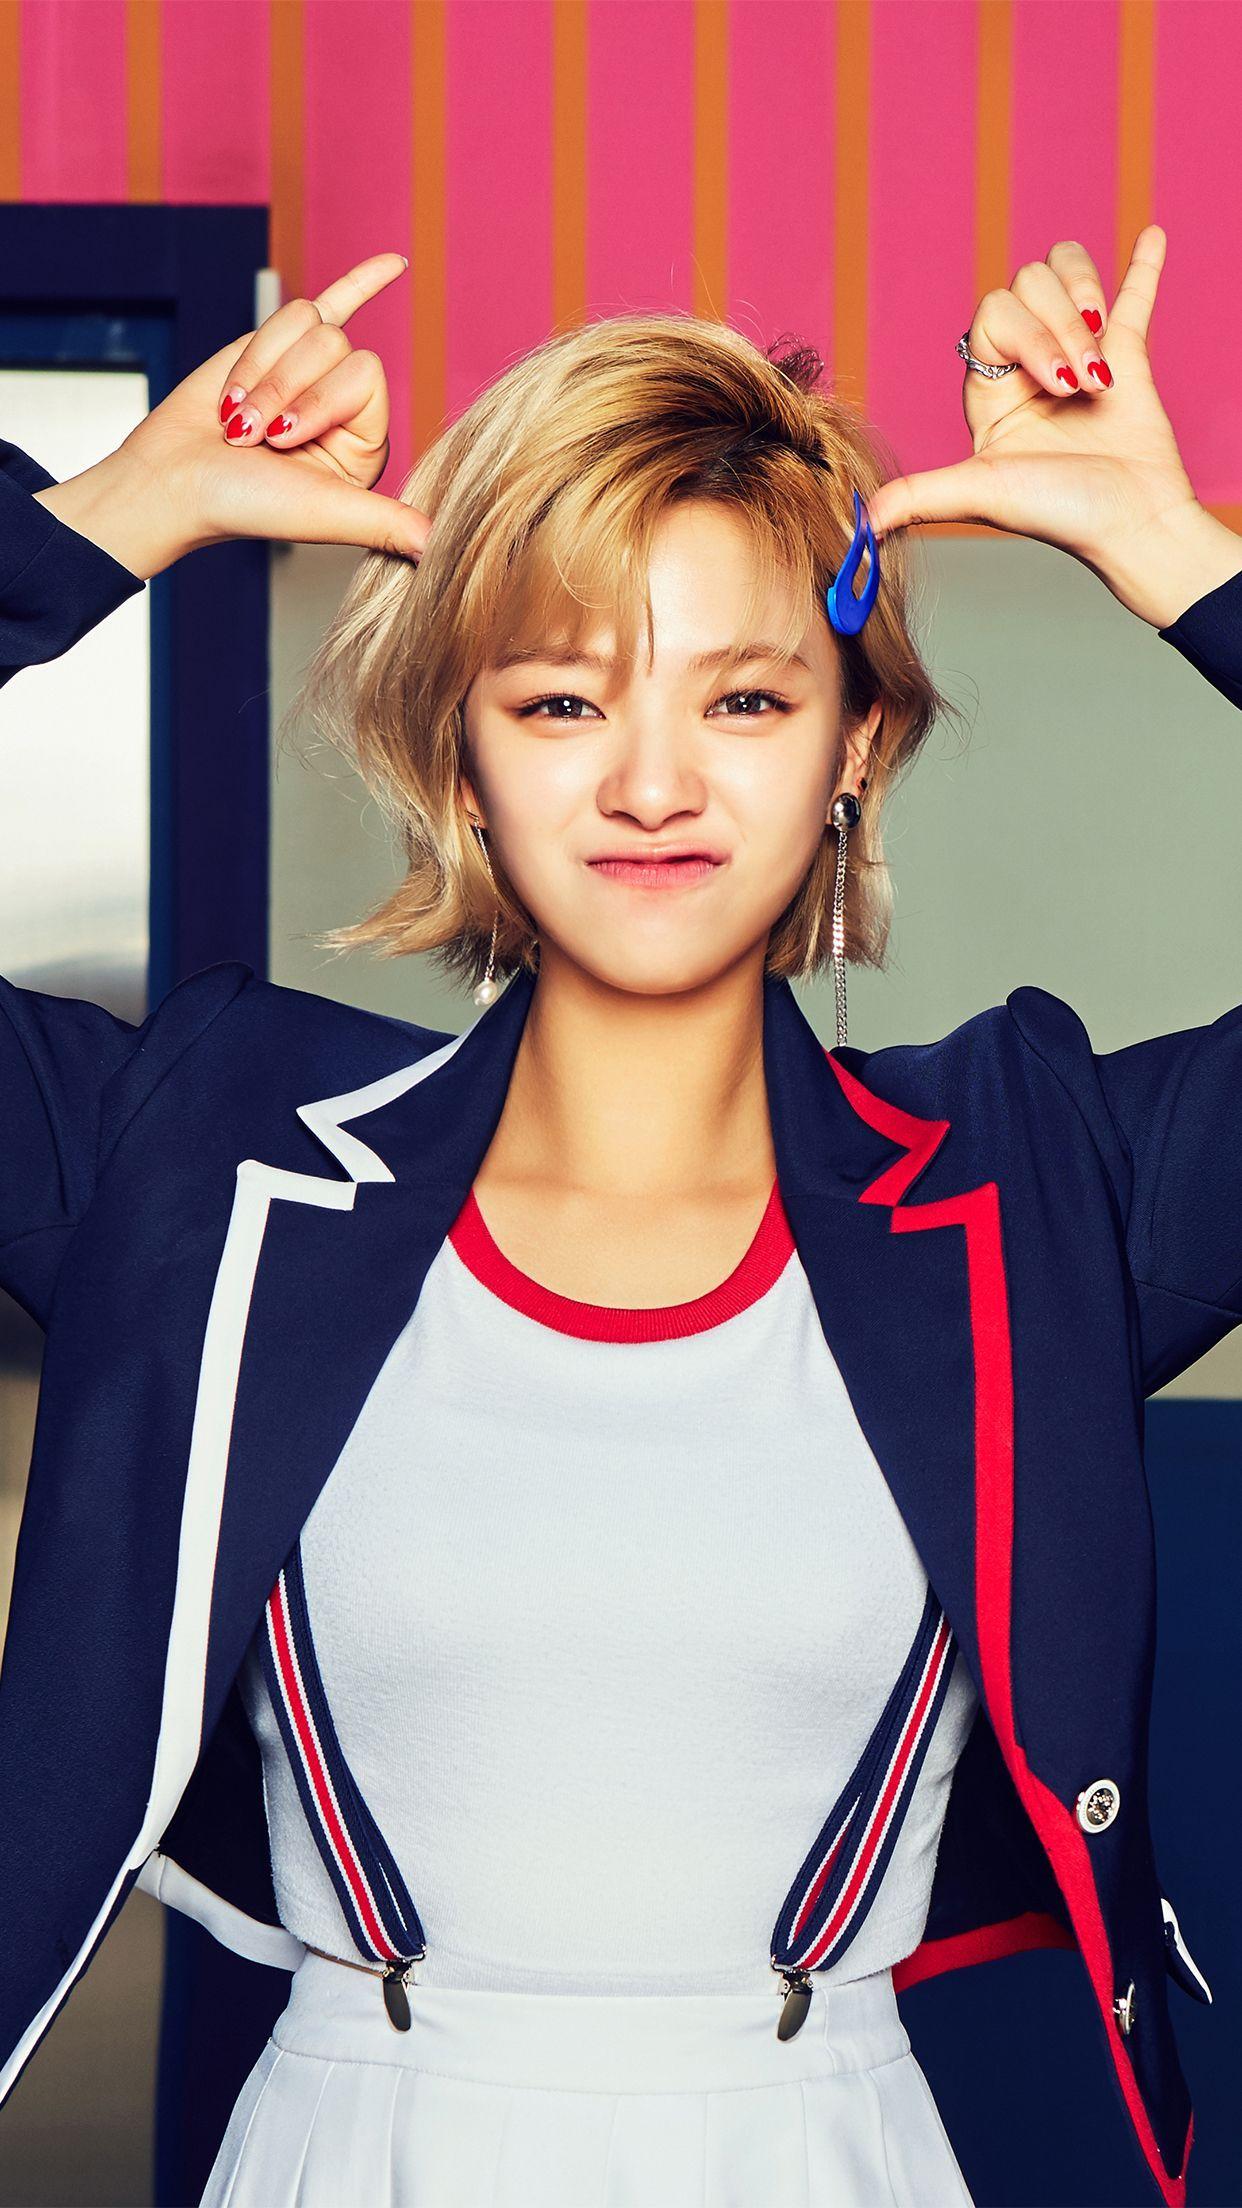 Image result for twice jeongyeon